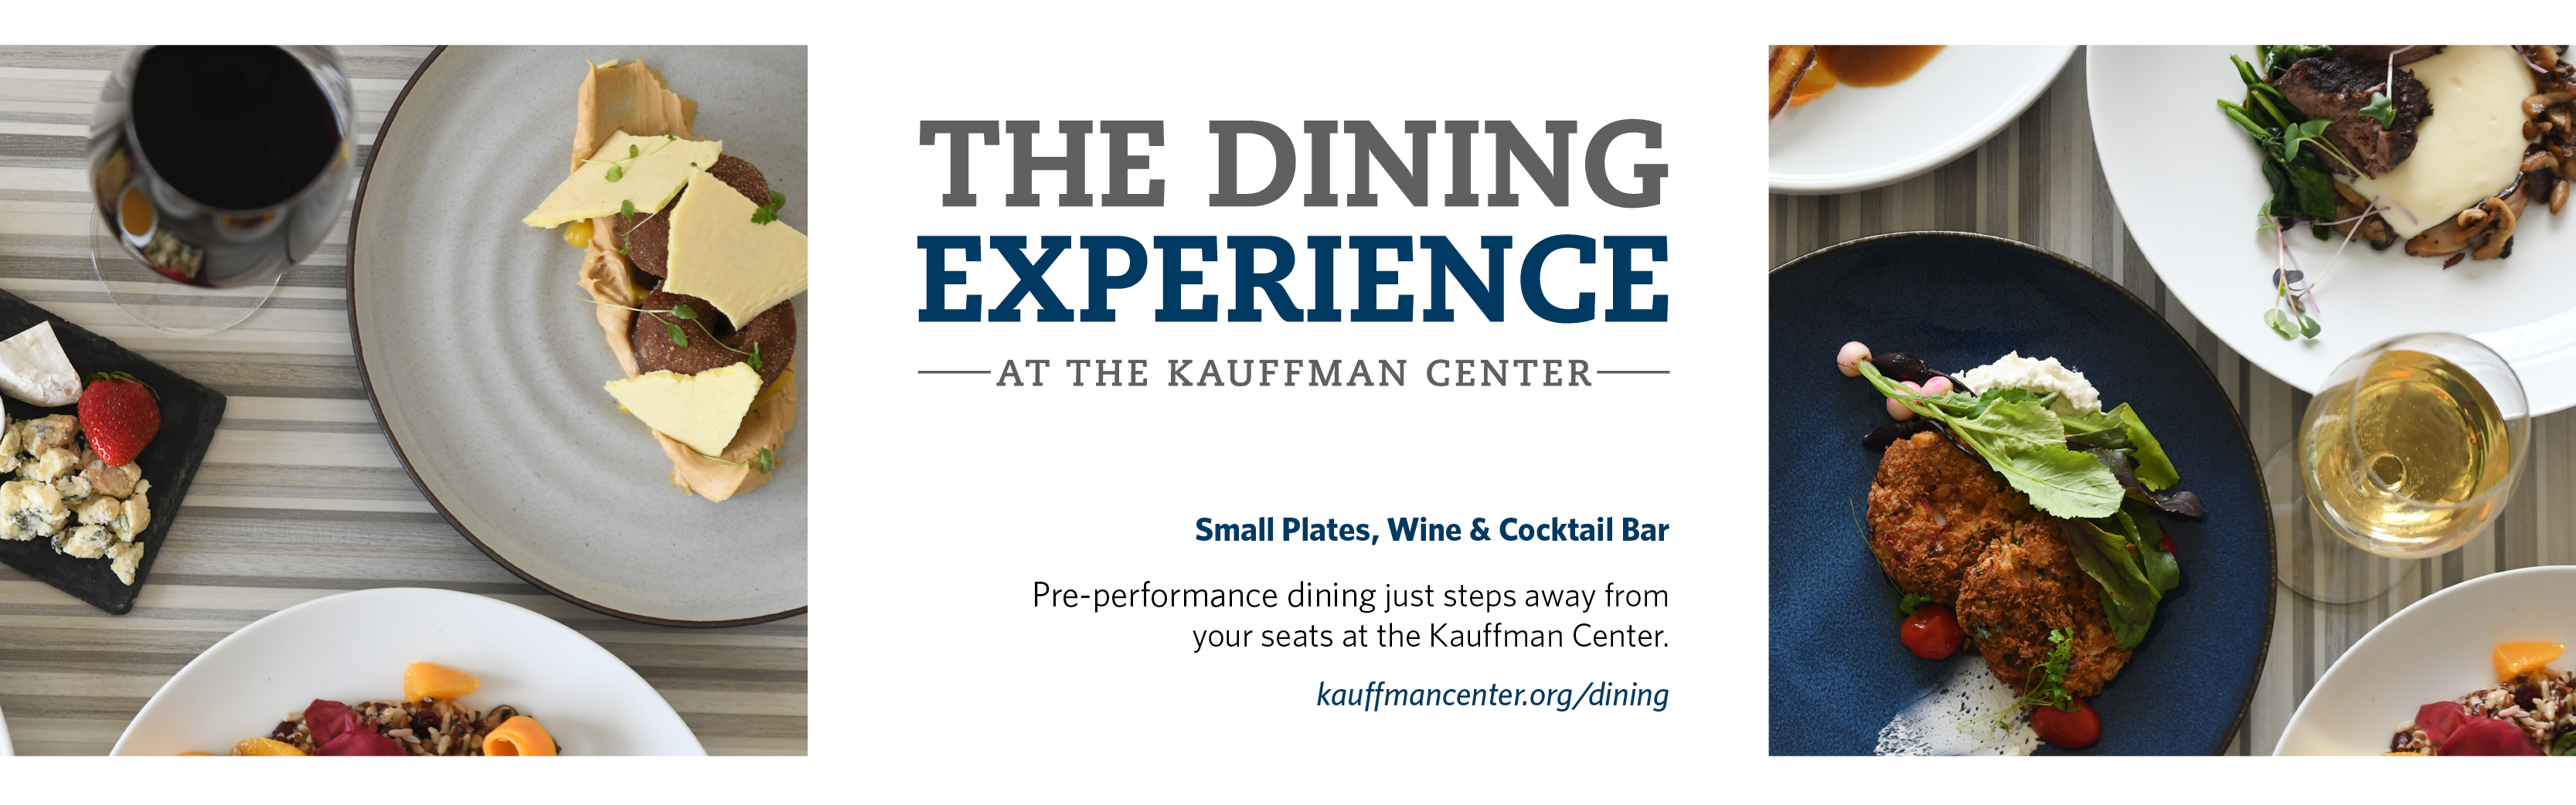 The Dining Experience at the Kauffman Center